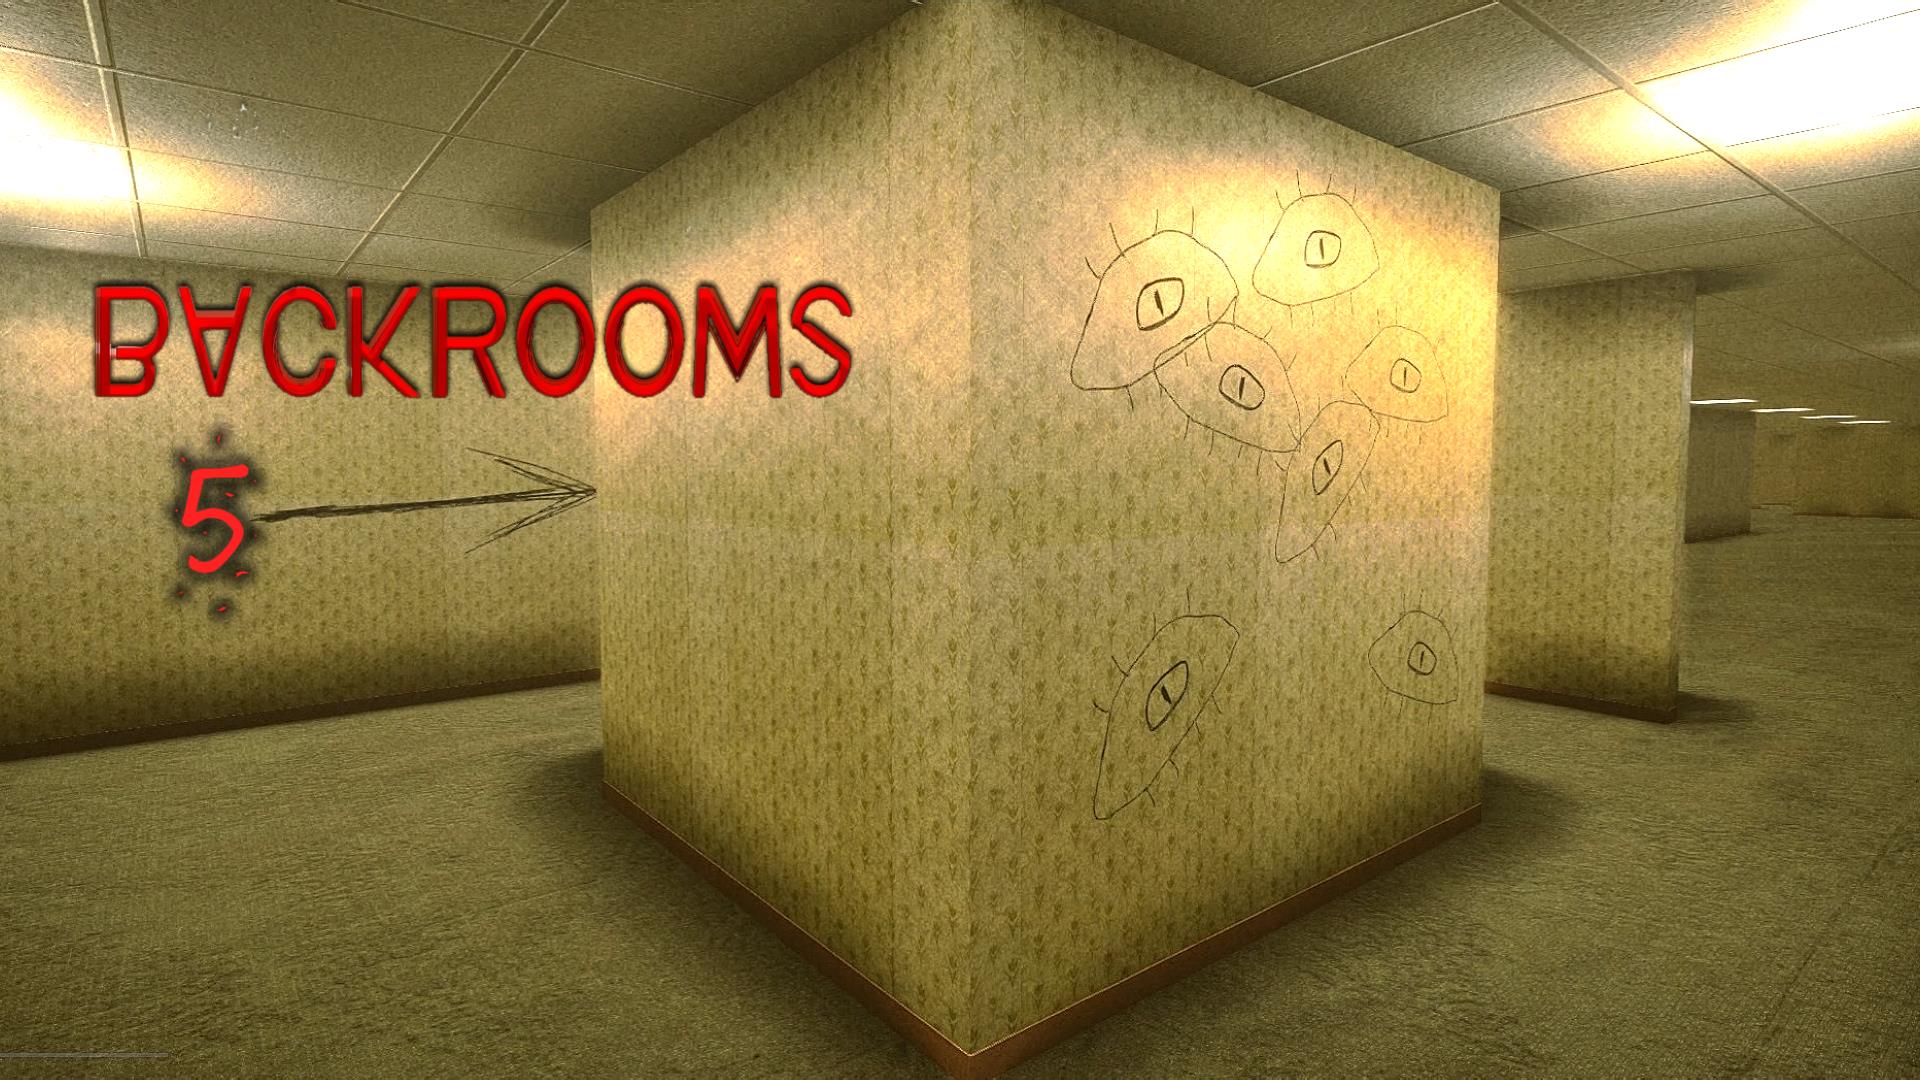 Sand Productions) Backroom Movies mod for The Backrooms Game - ModDB